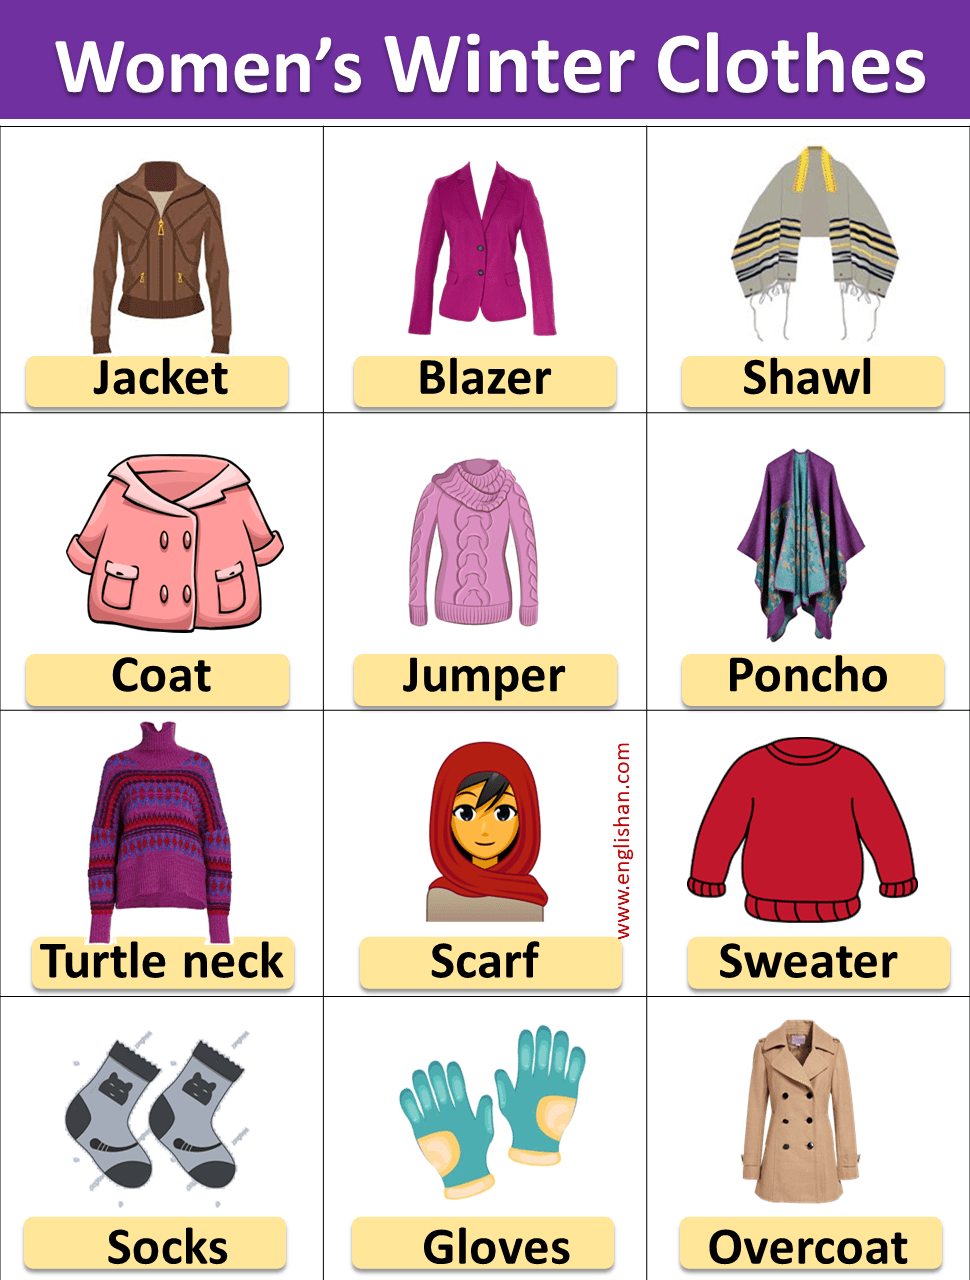 Women’s Winter Clothes Picture Vocabulary 